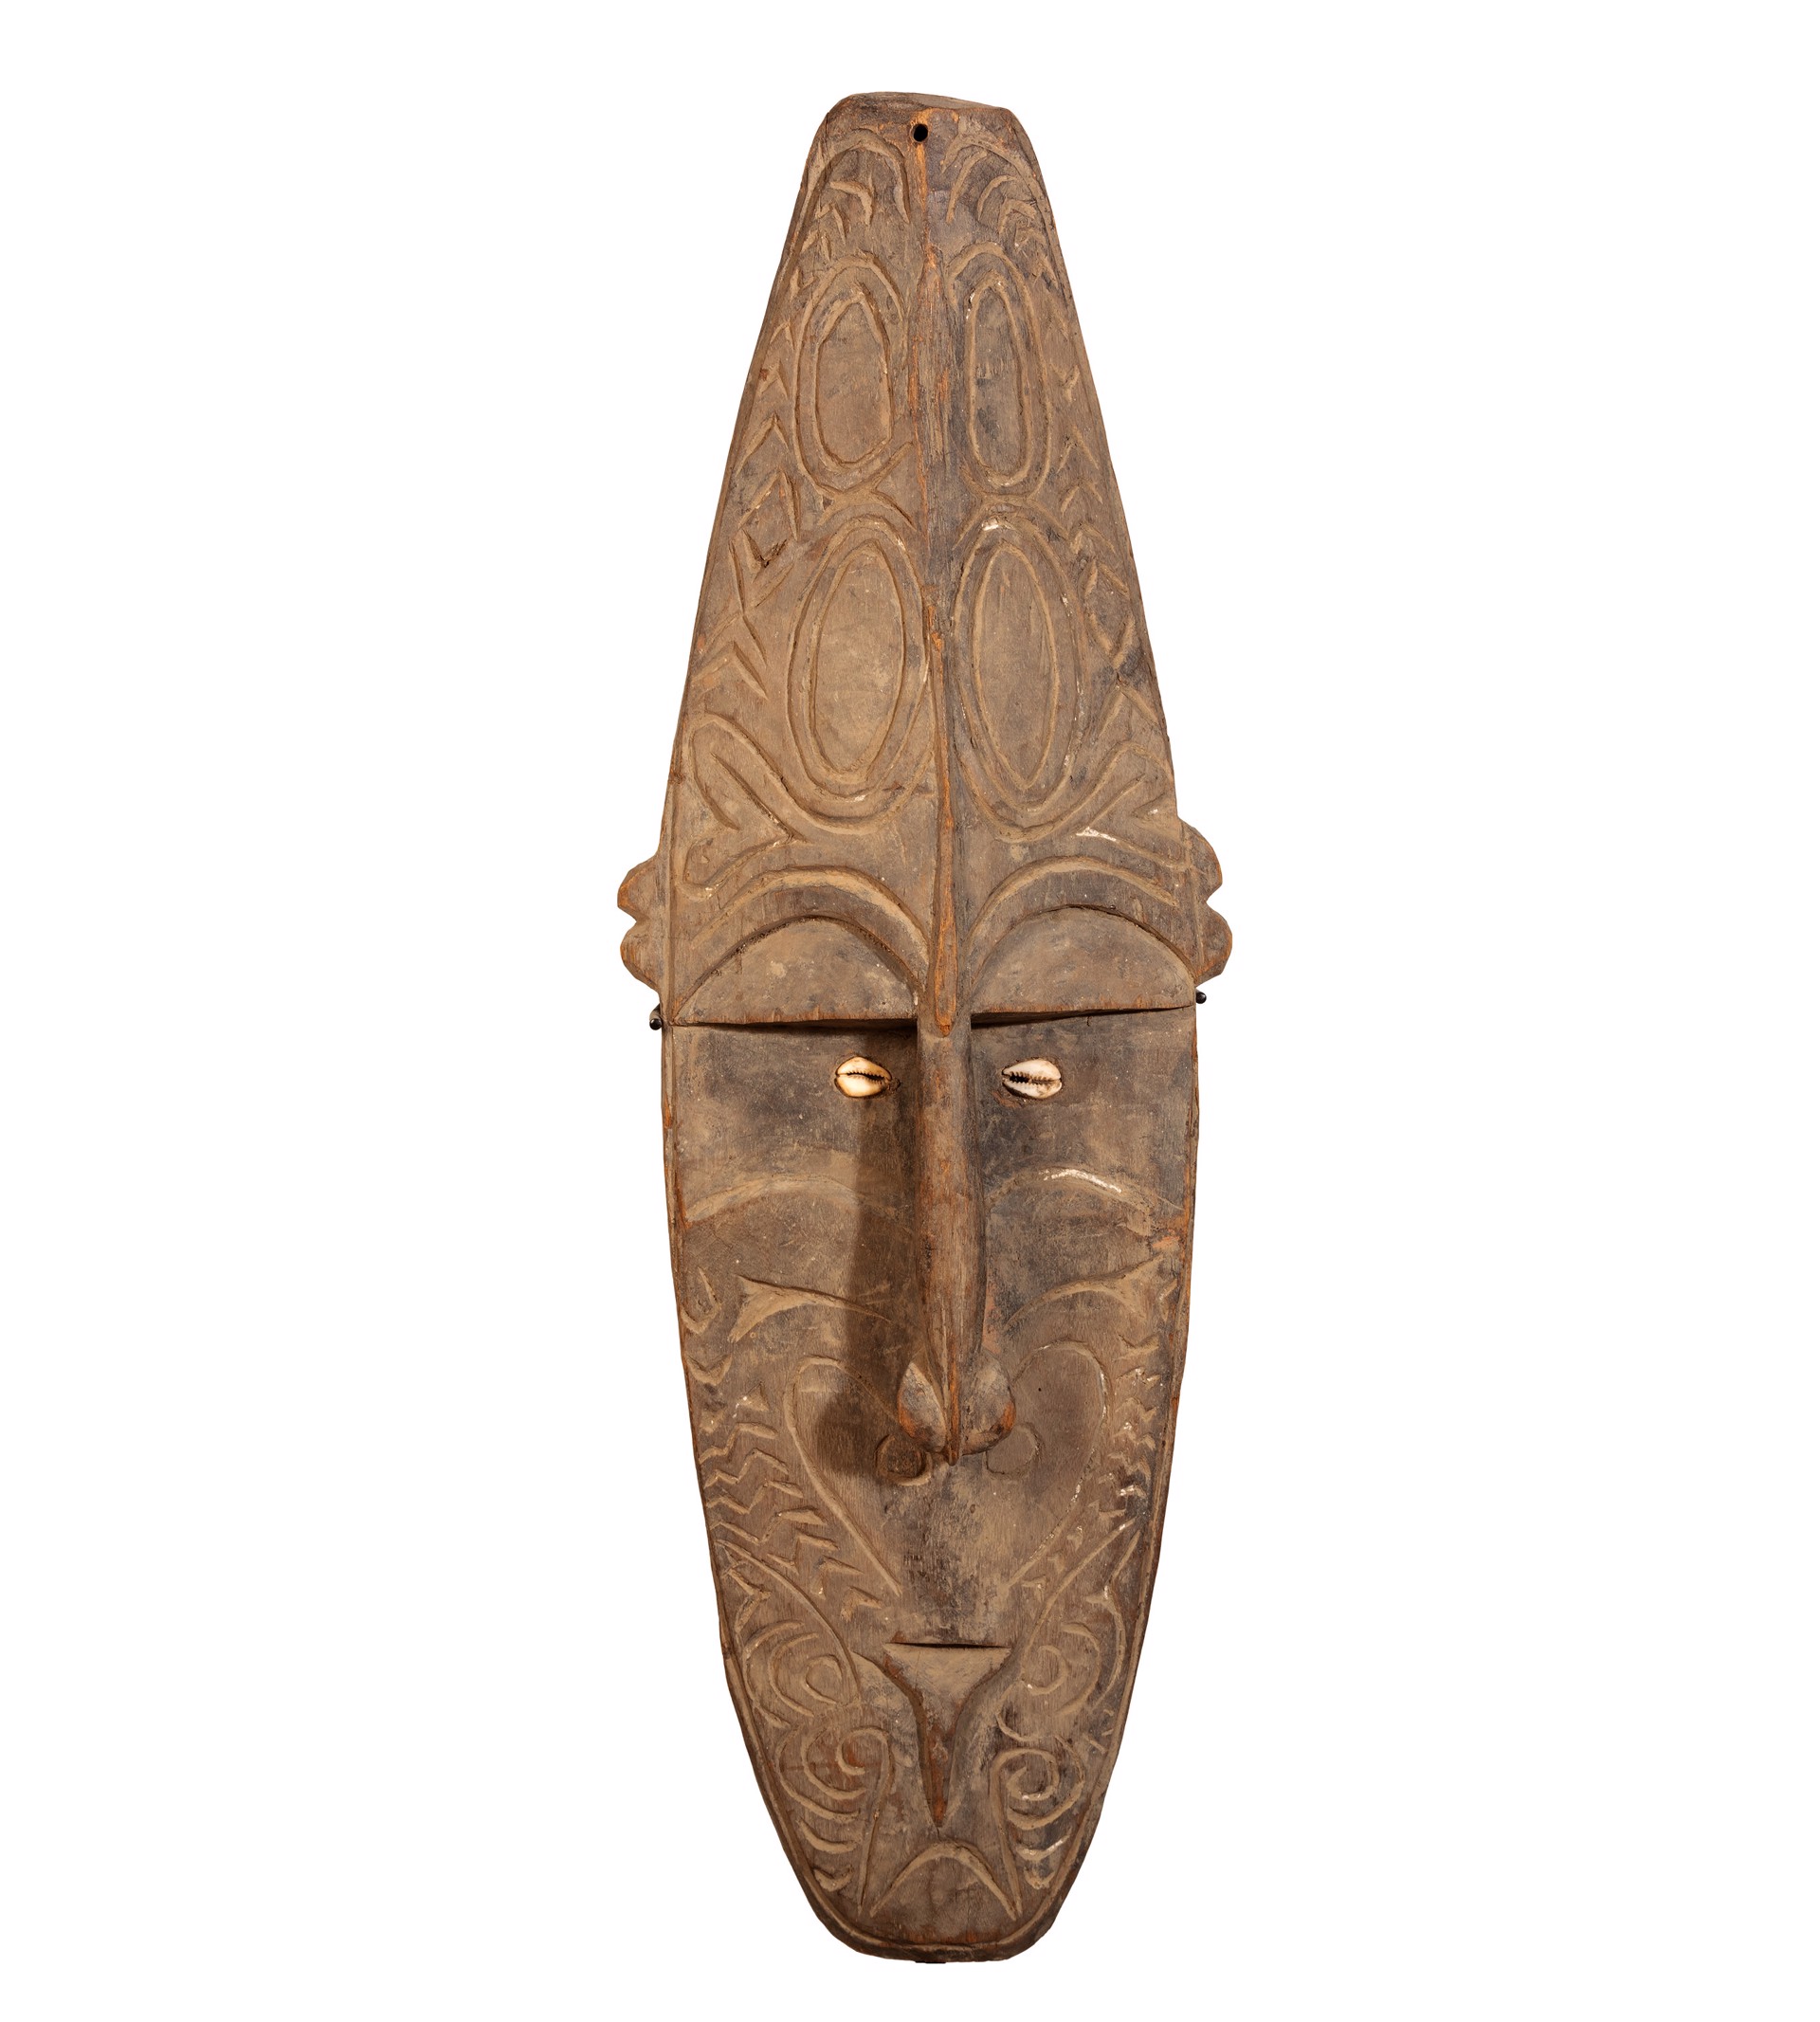 Face Mask by New Guinea